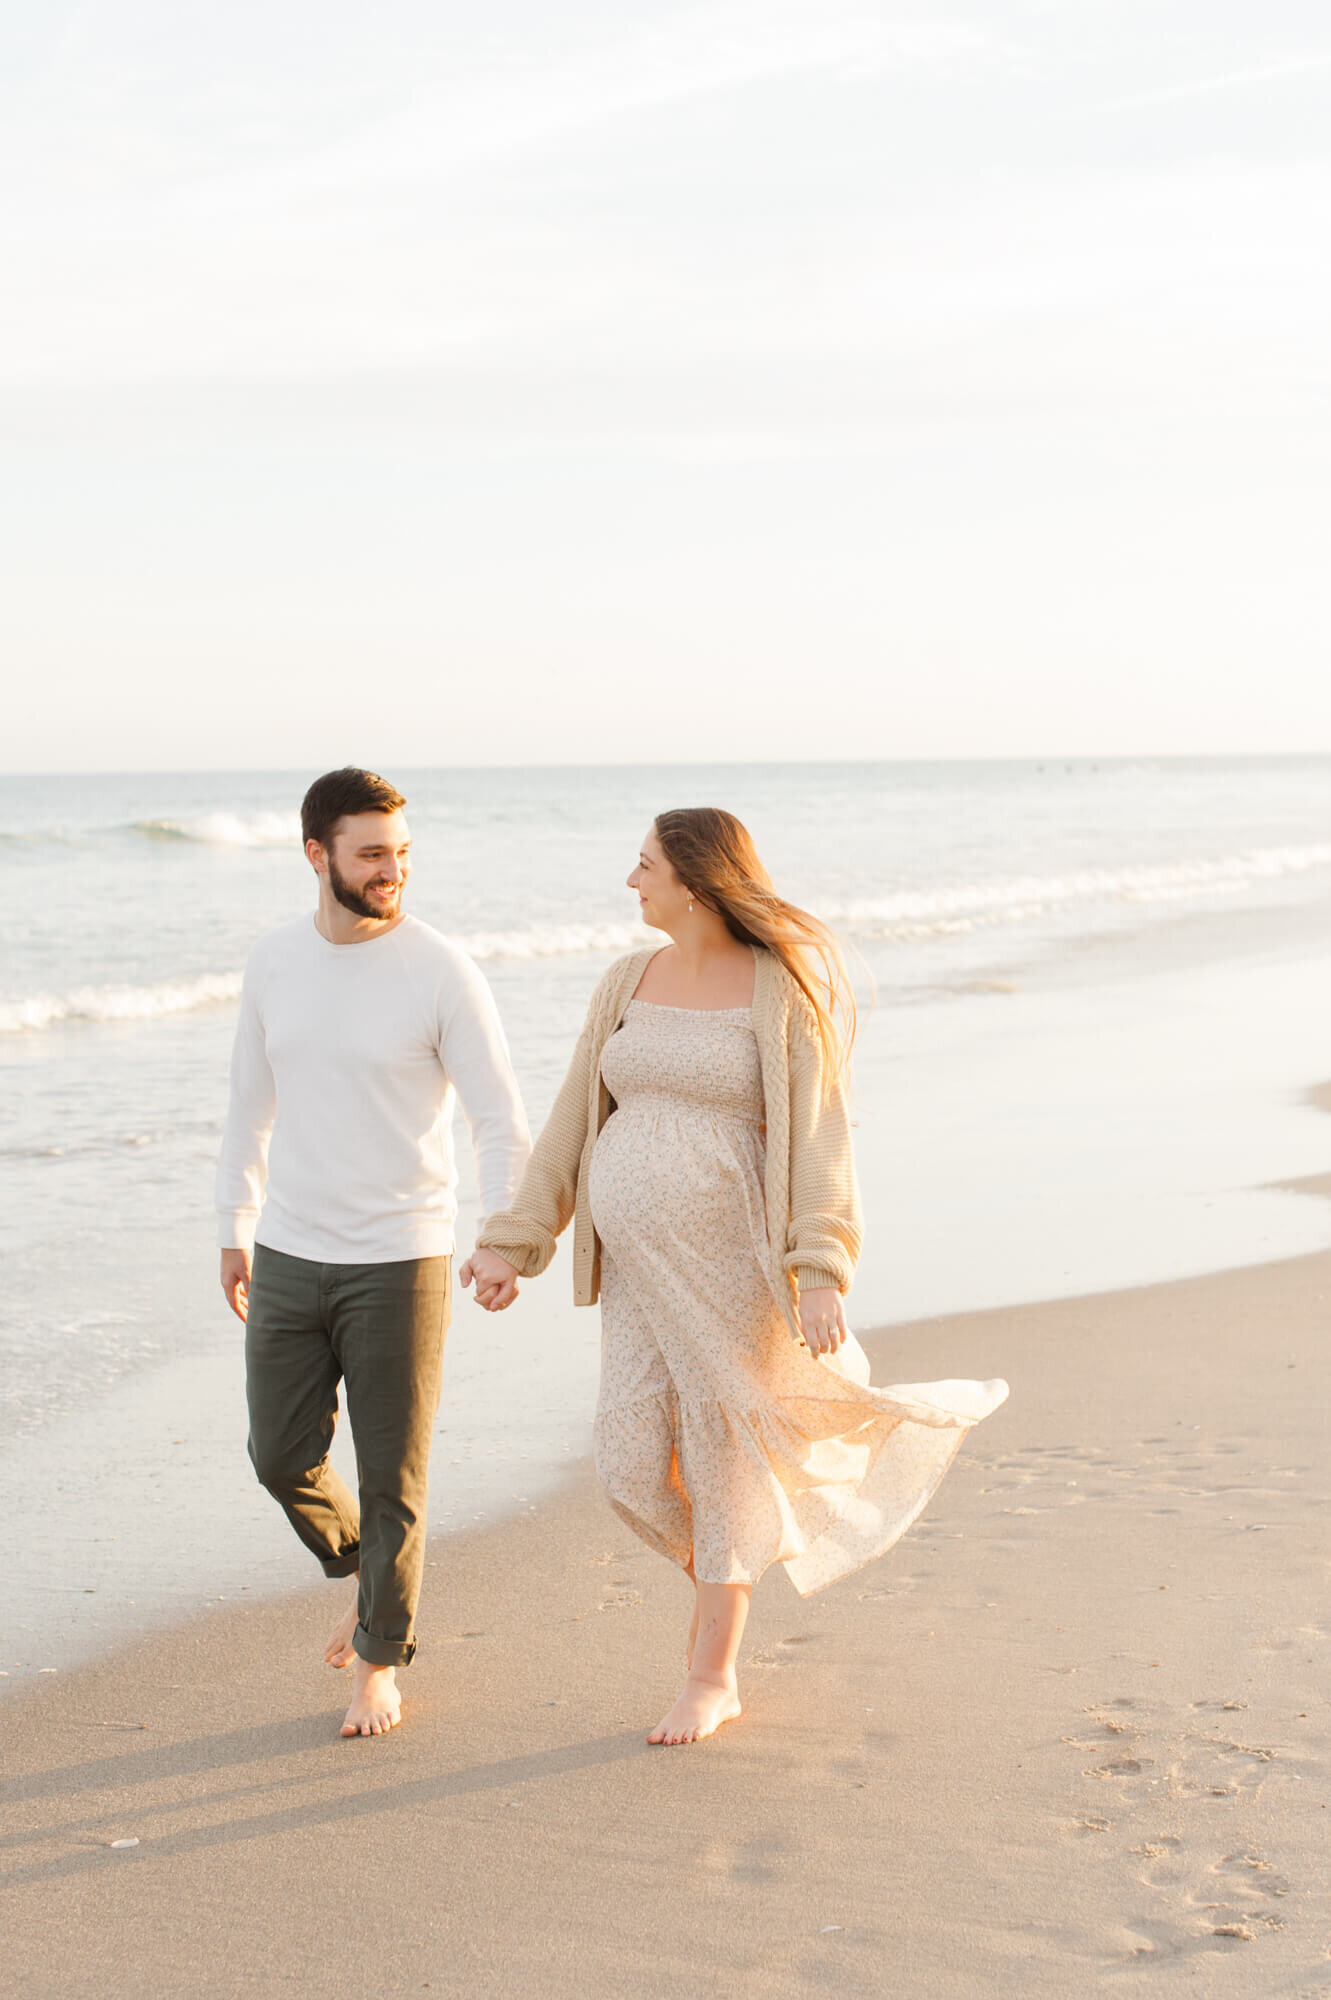 Pregnant couple walks hand in hand along the beach near the shoreline during golden hour